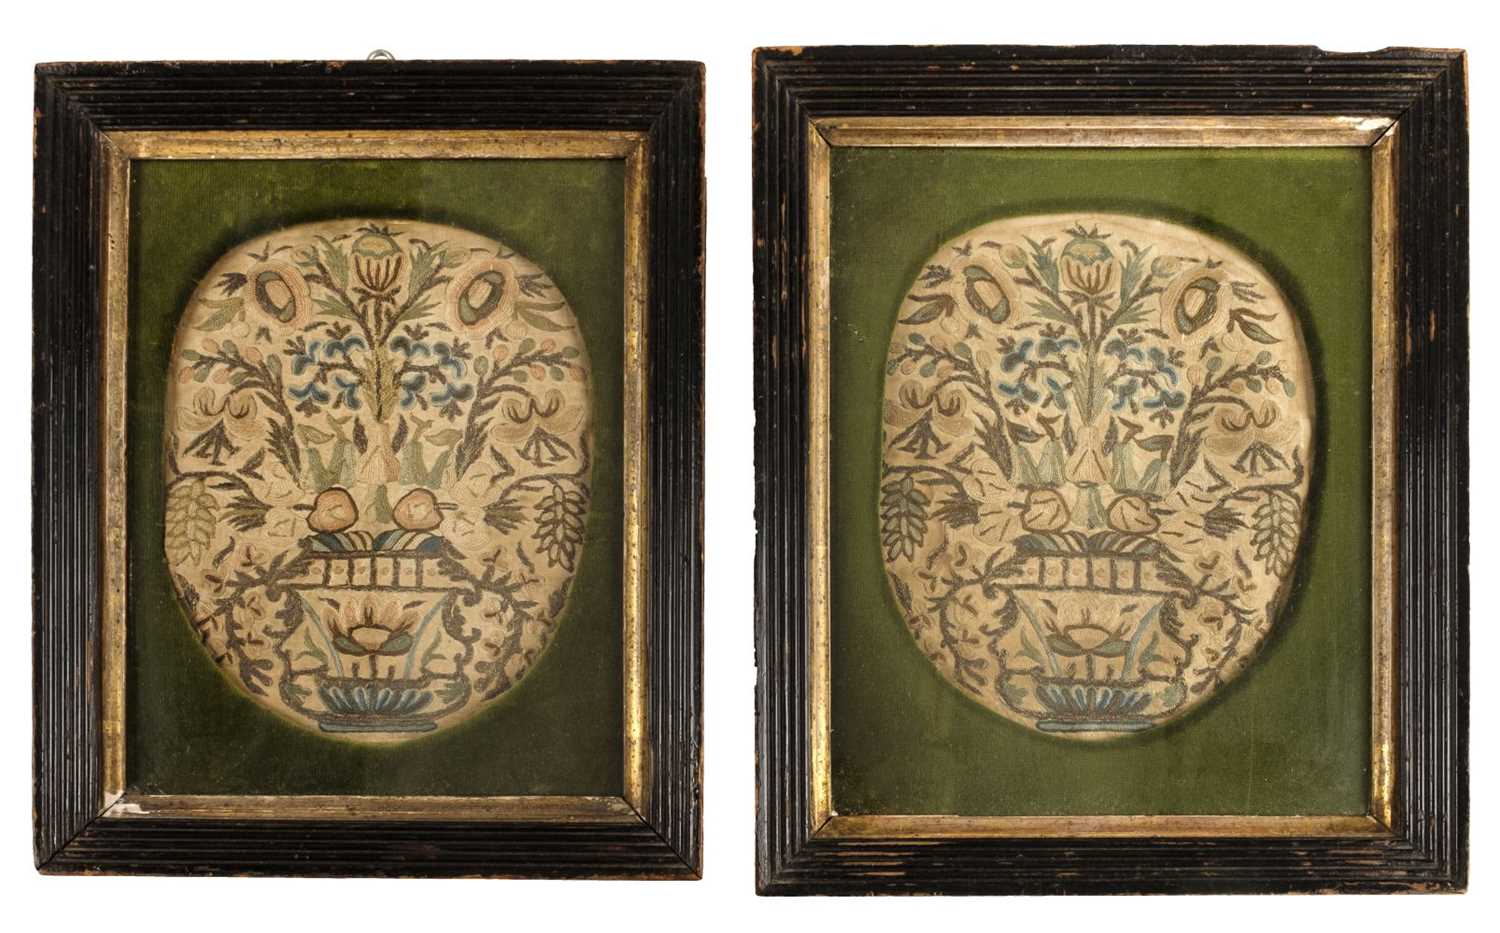 Lot 270 - Embroidered pictures. A pair of embroideries, 17th century